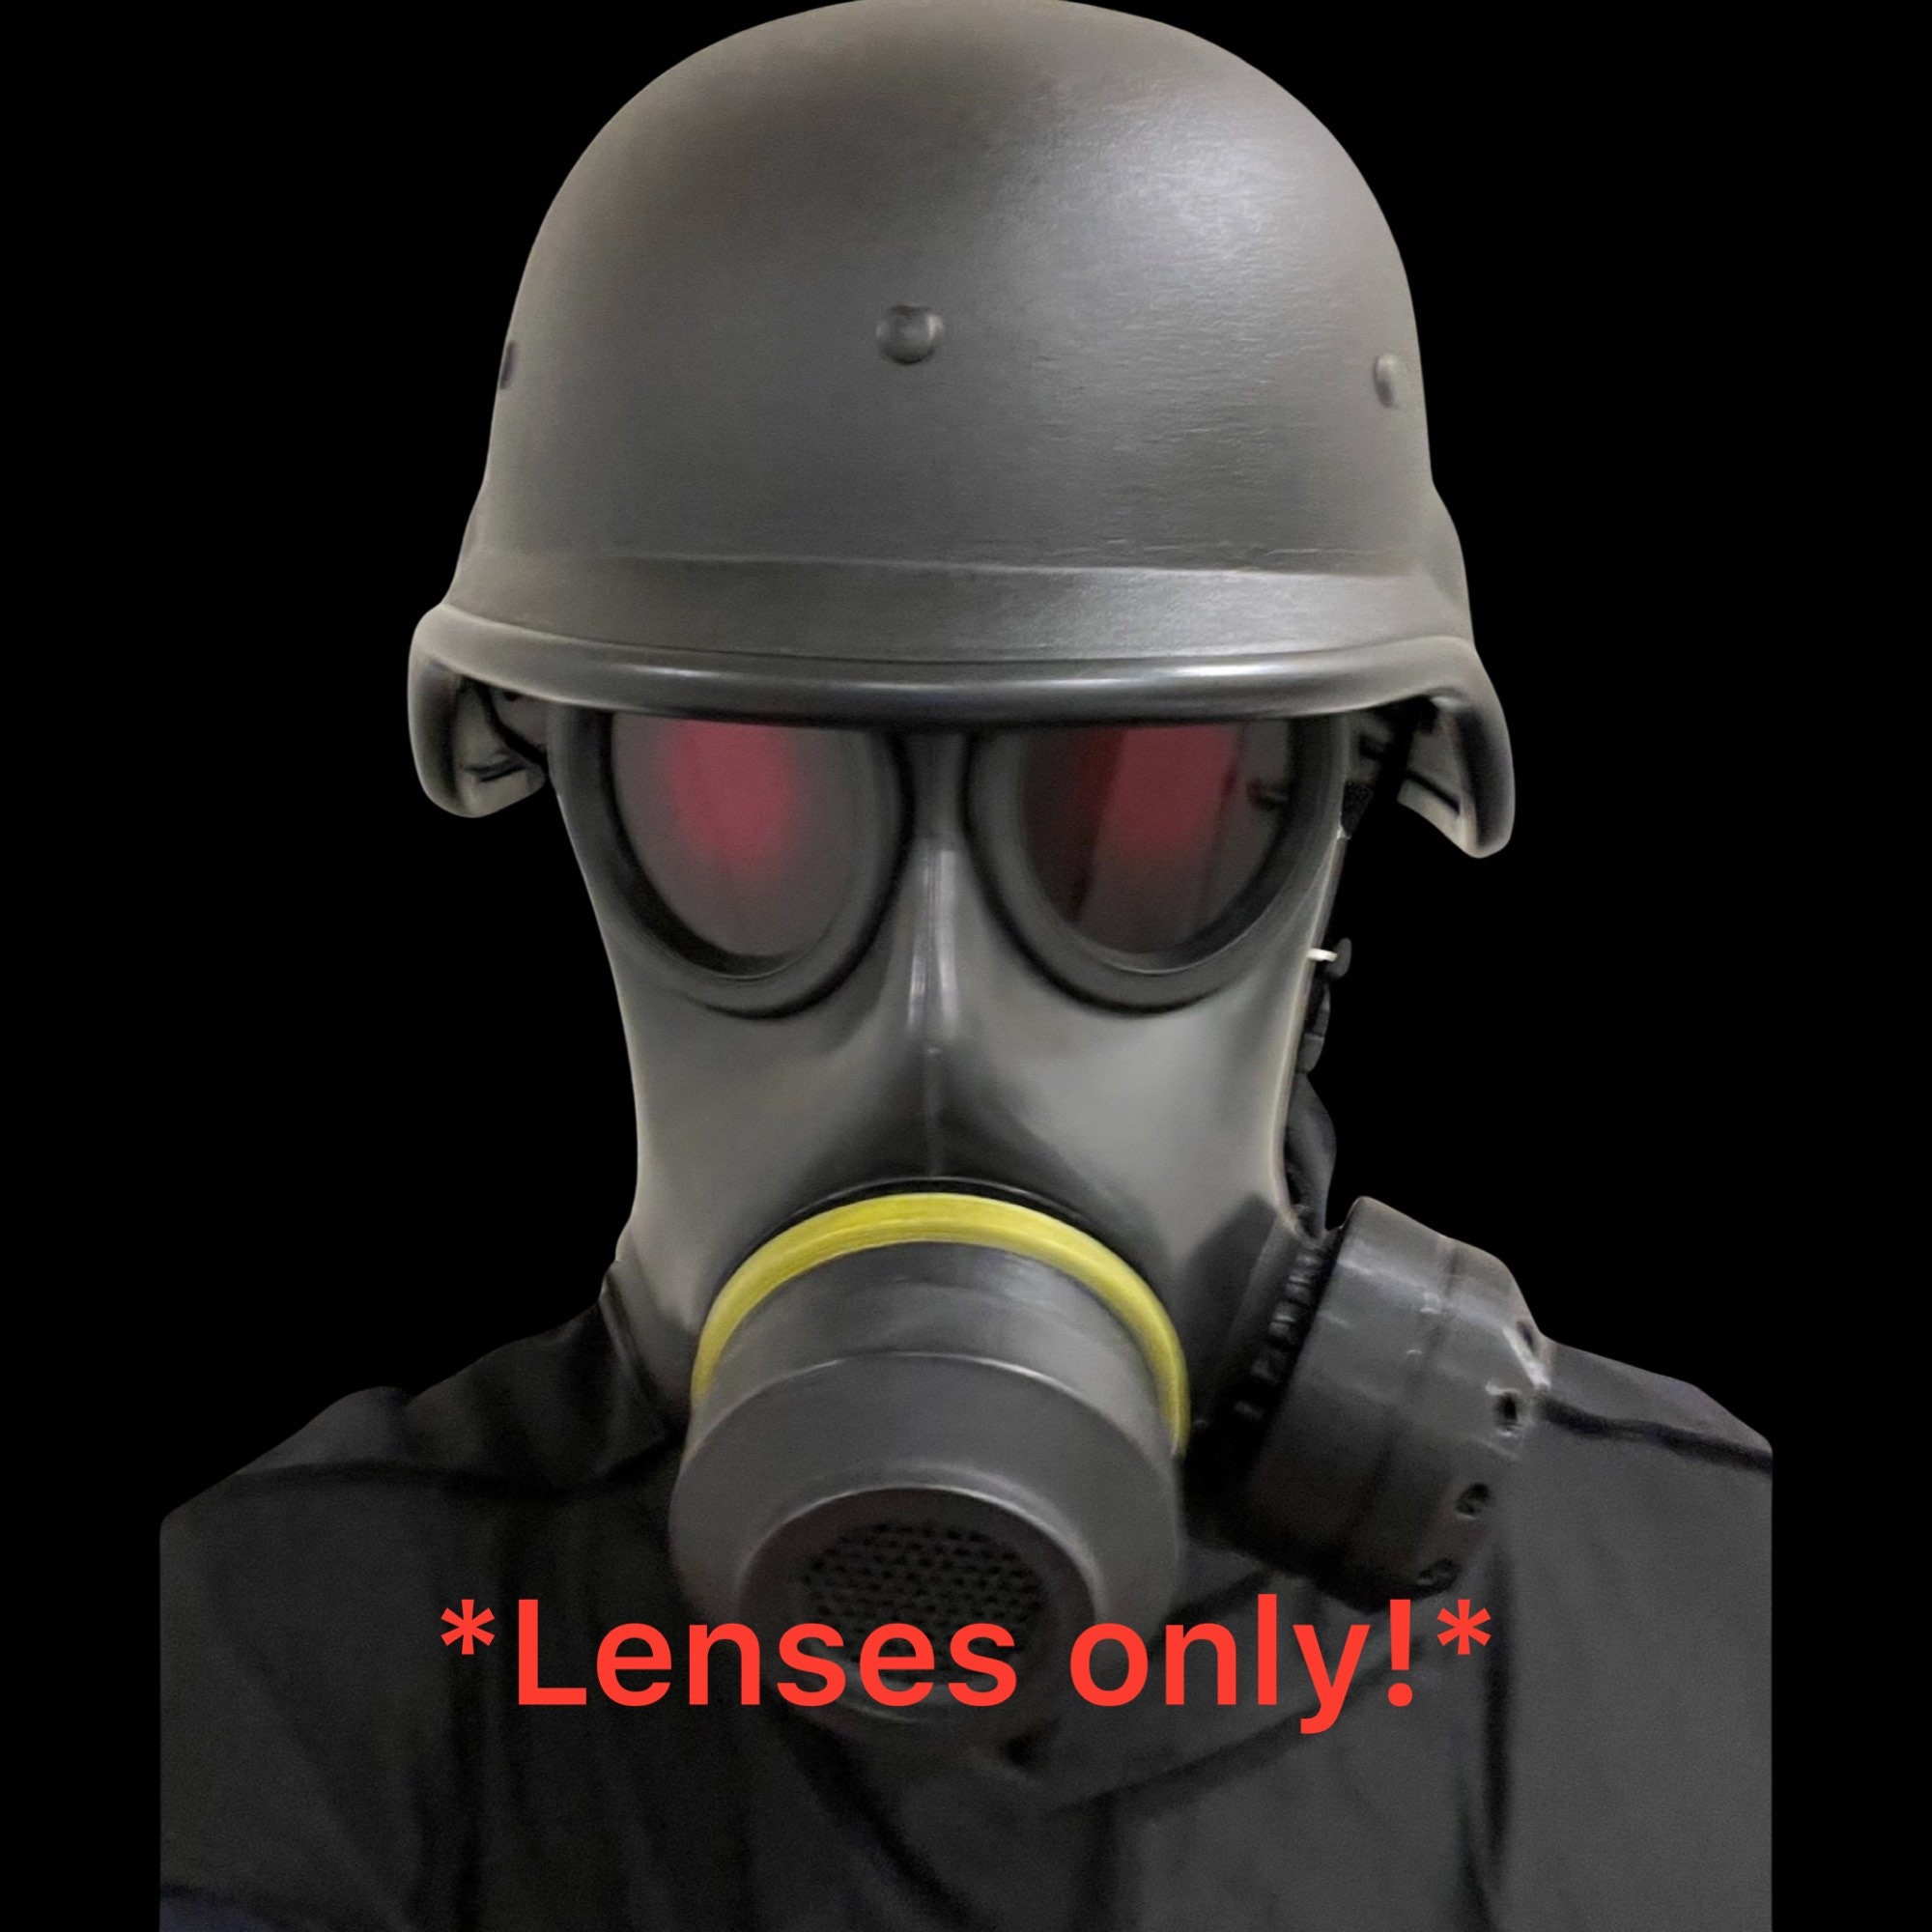 Soviet Gas mask GP-5 MC-1 PMG Replacement Lenses for Airsoft this is Vital